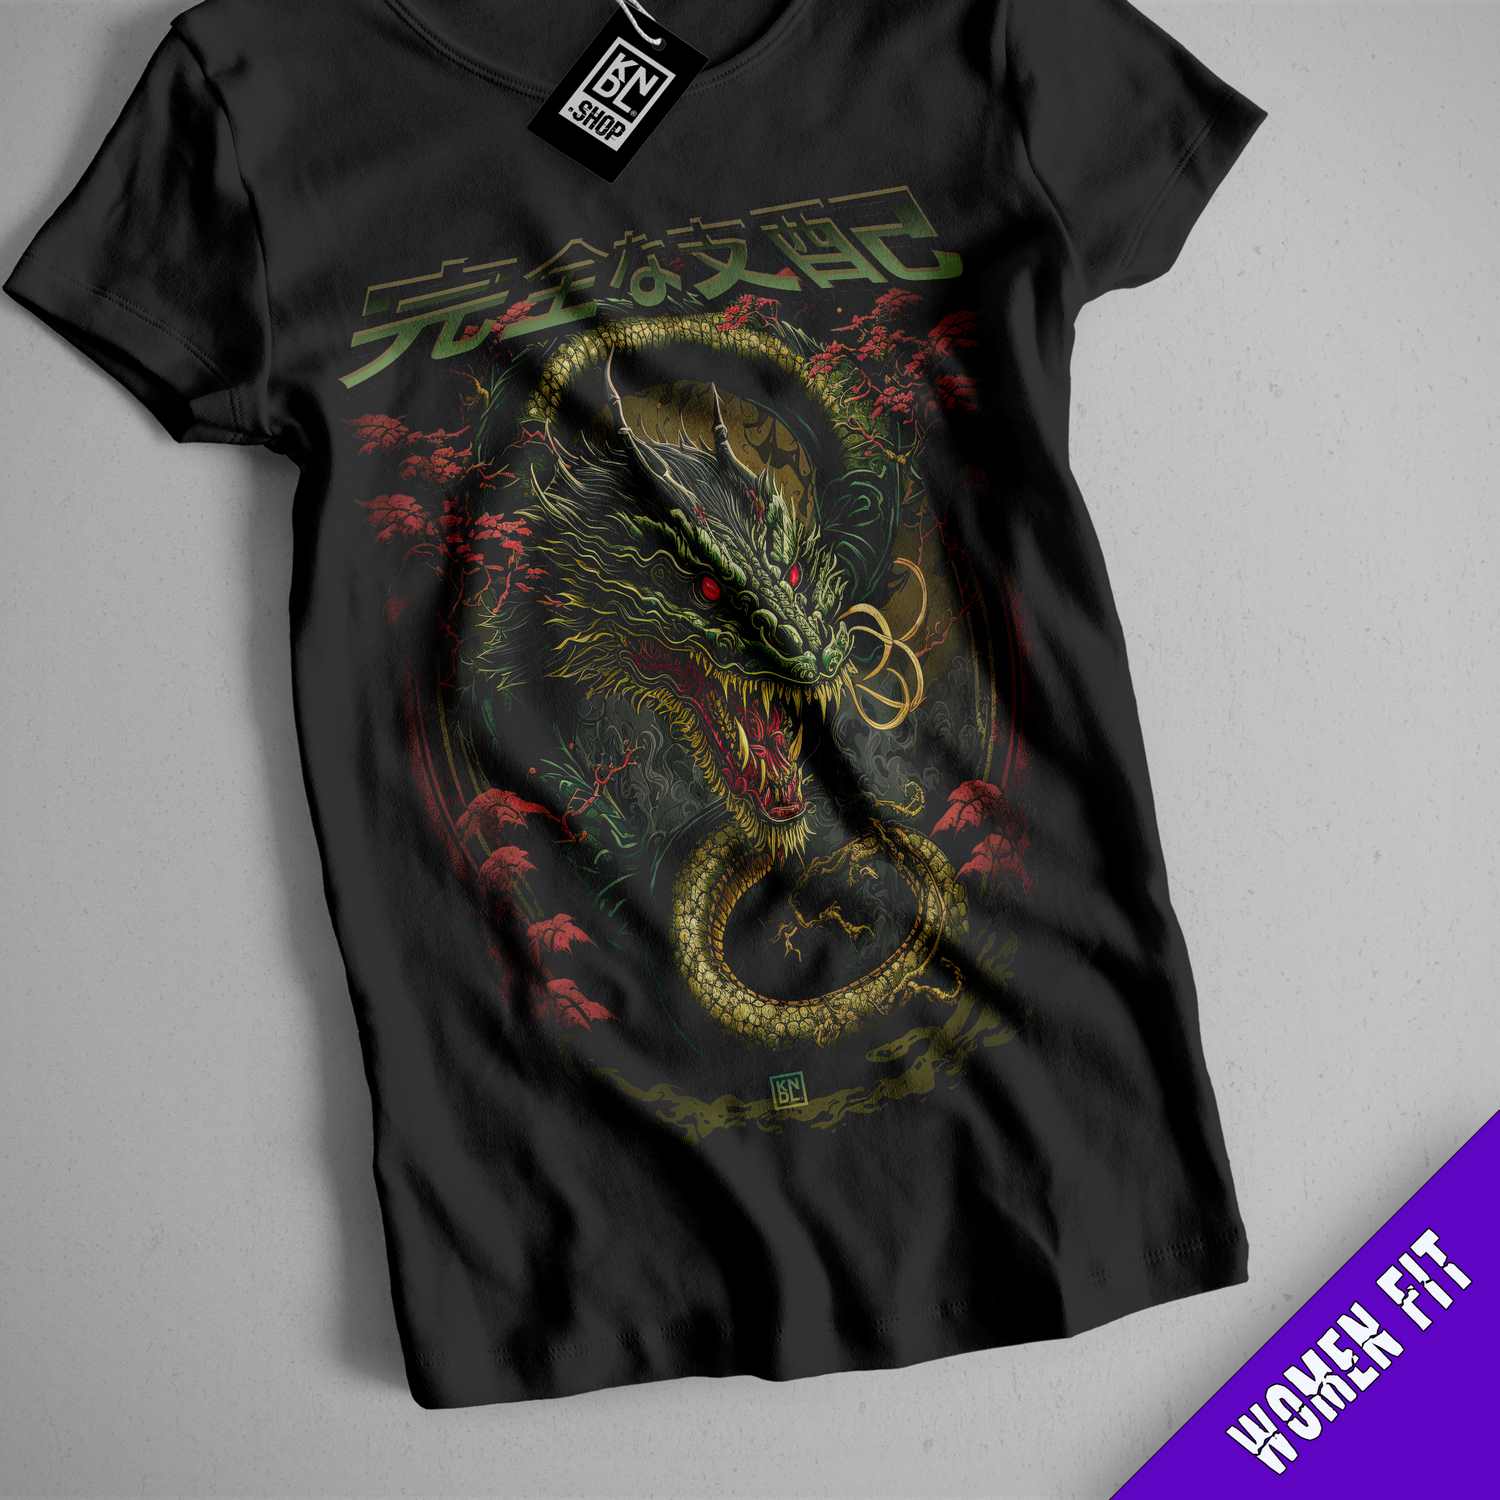 a black shirt with a dragon on it